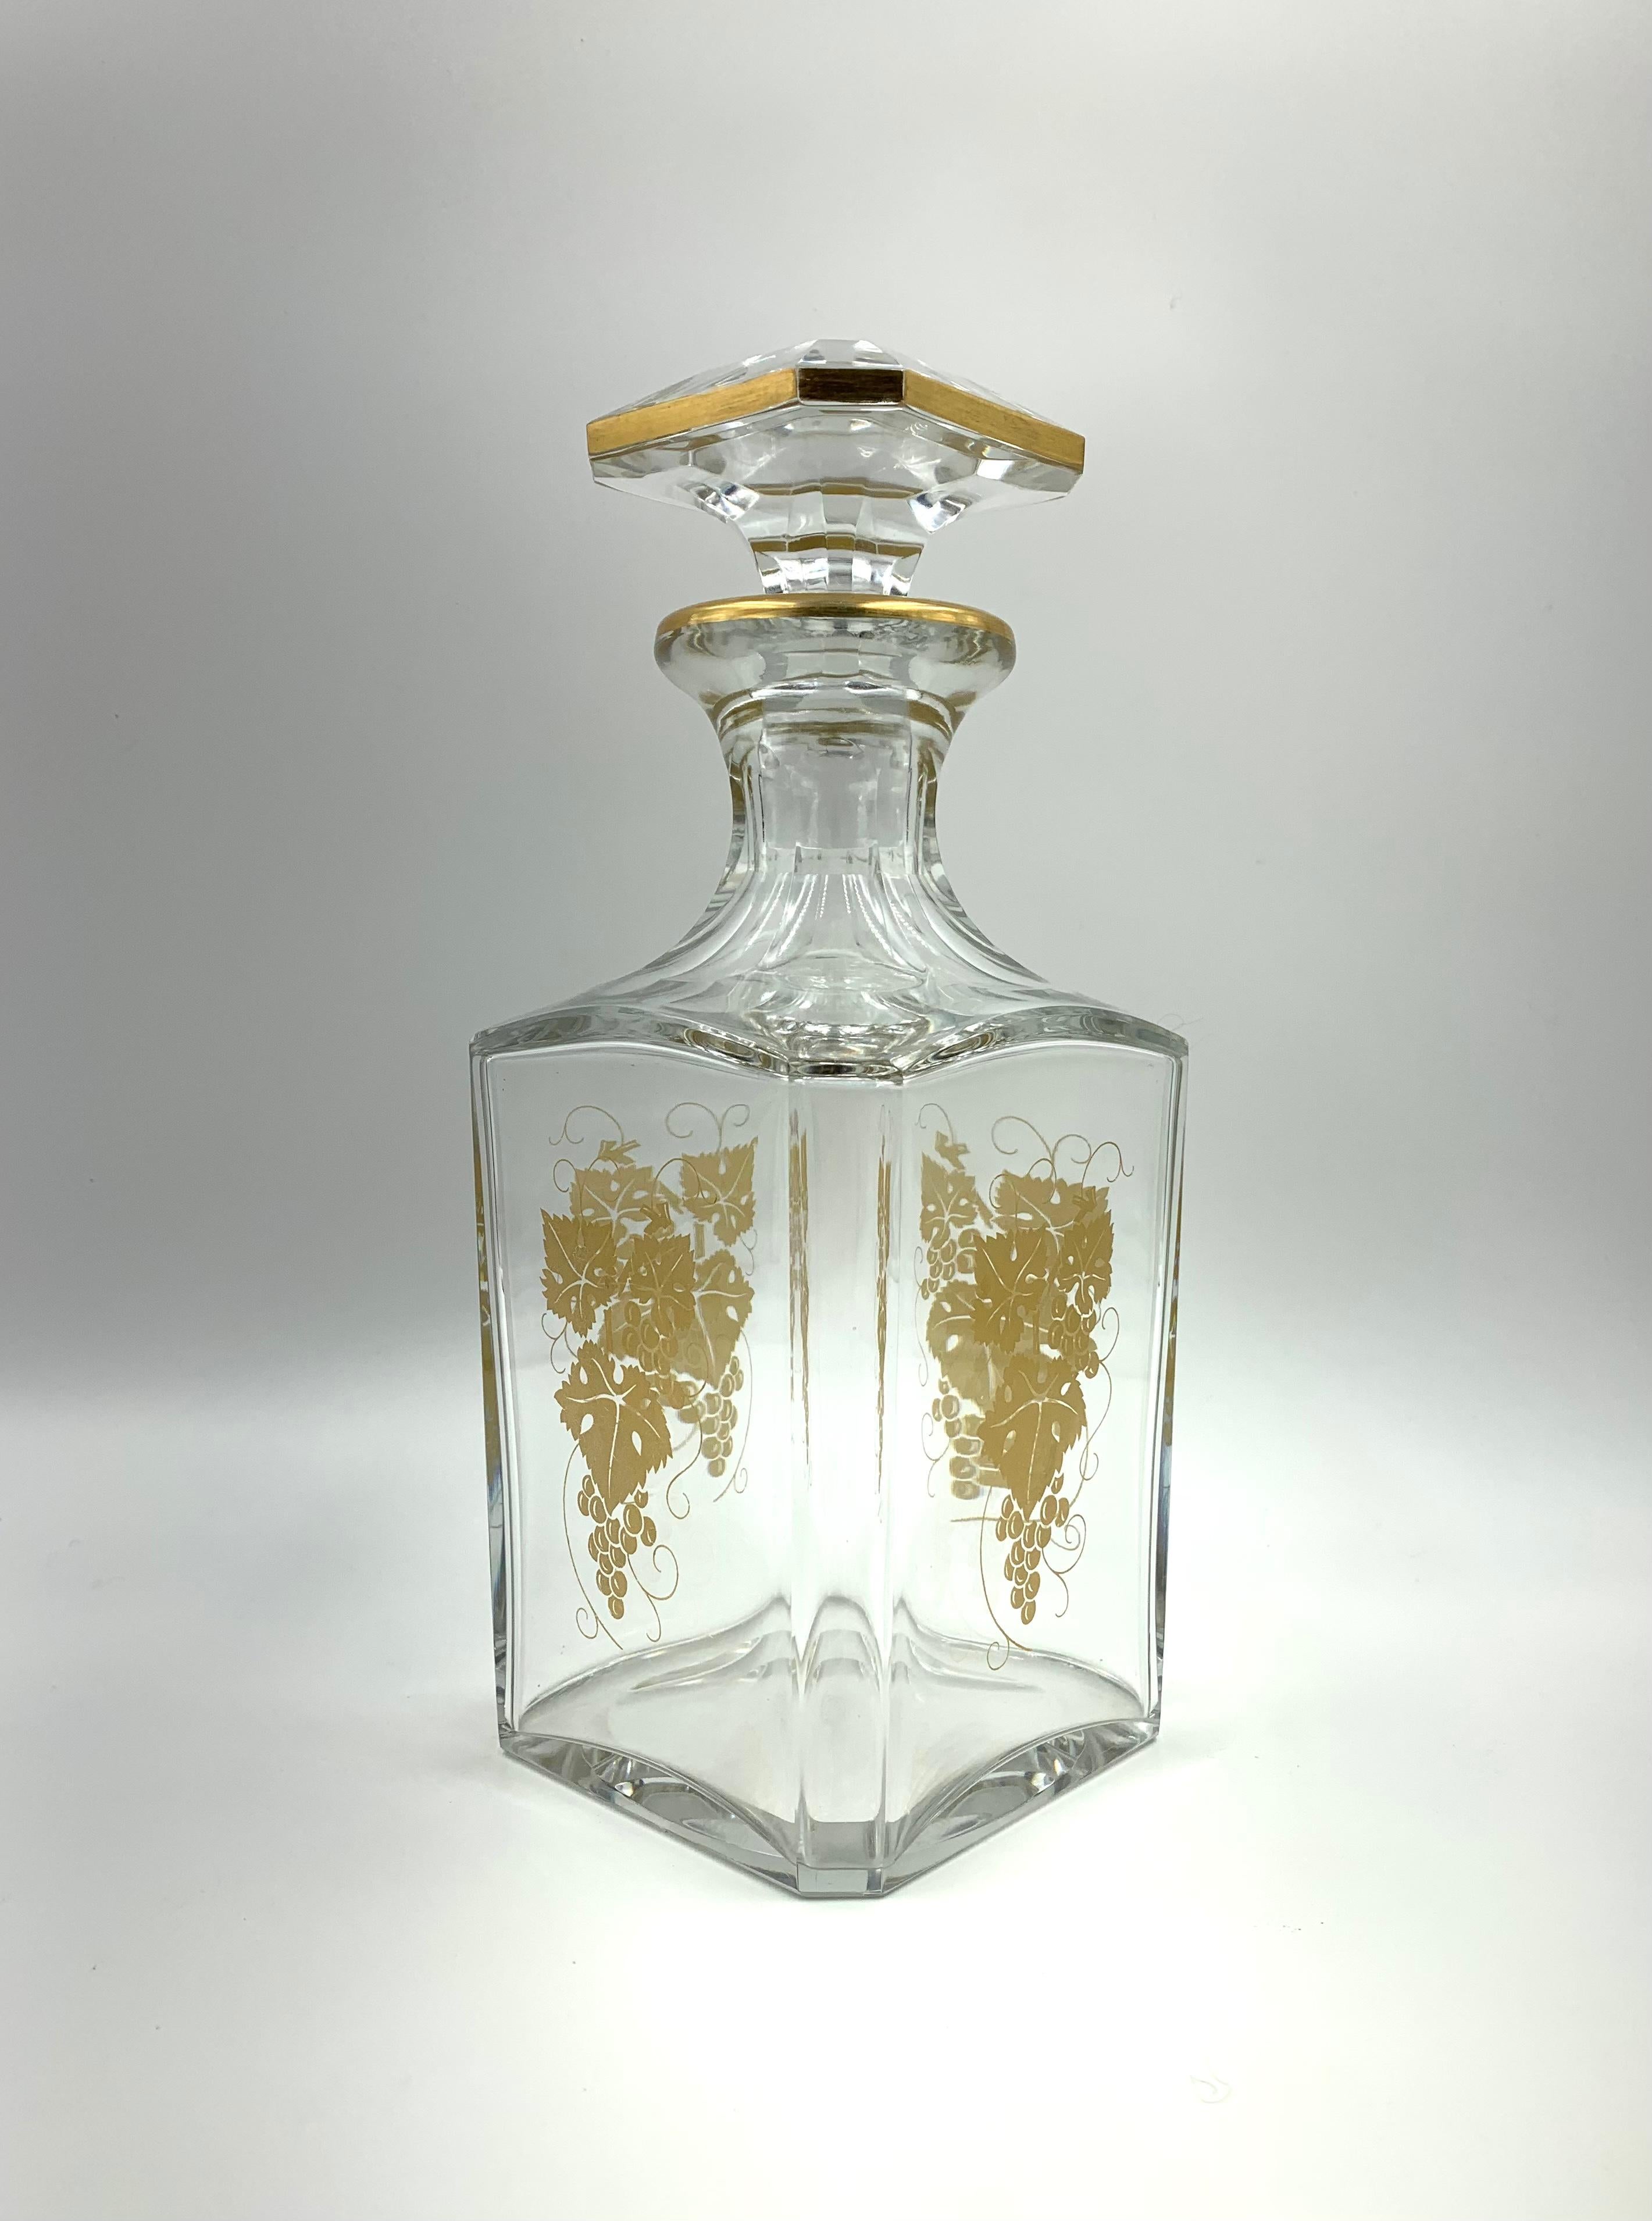 Fine Baccarat Empire Harcourt whiskey decanter in a rare special edition featuring gilded grape motif. We have only come across this design once before in the thirty or so years of selling Baccarat pieces. This attractive model features the classic